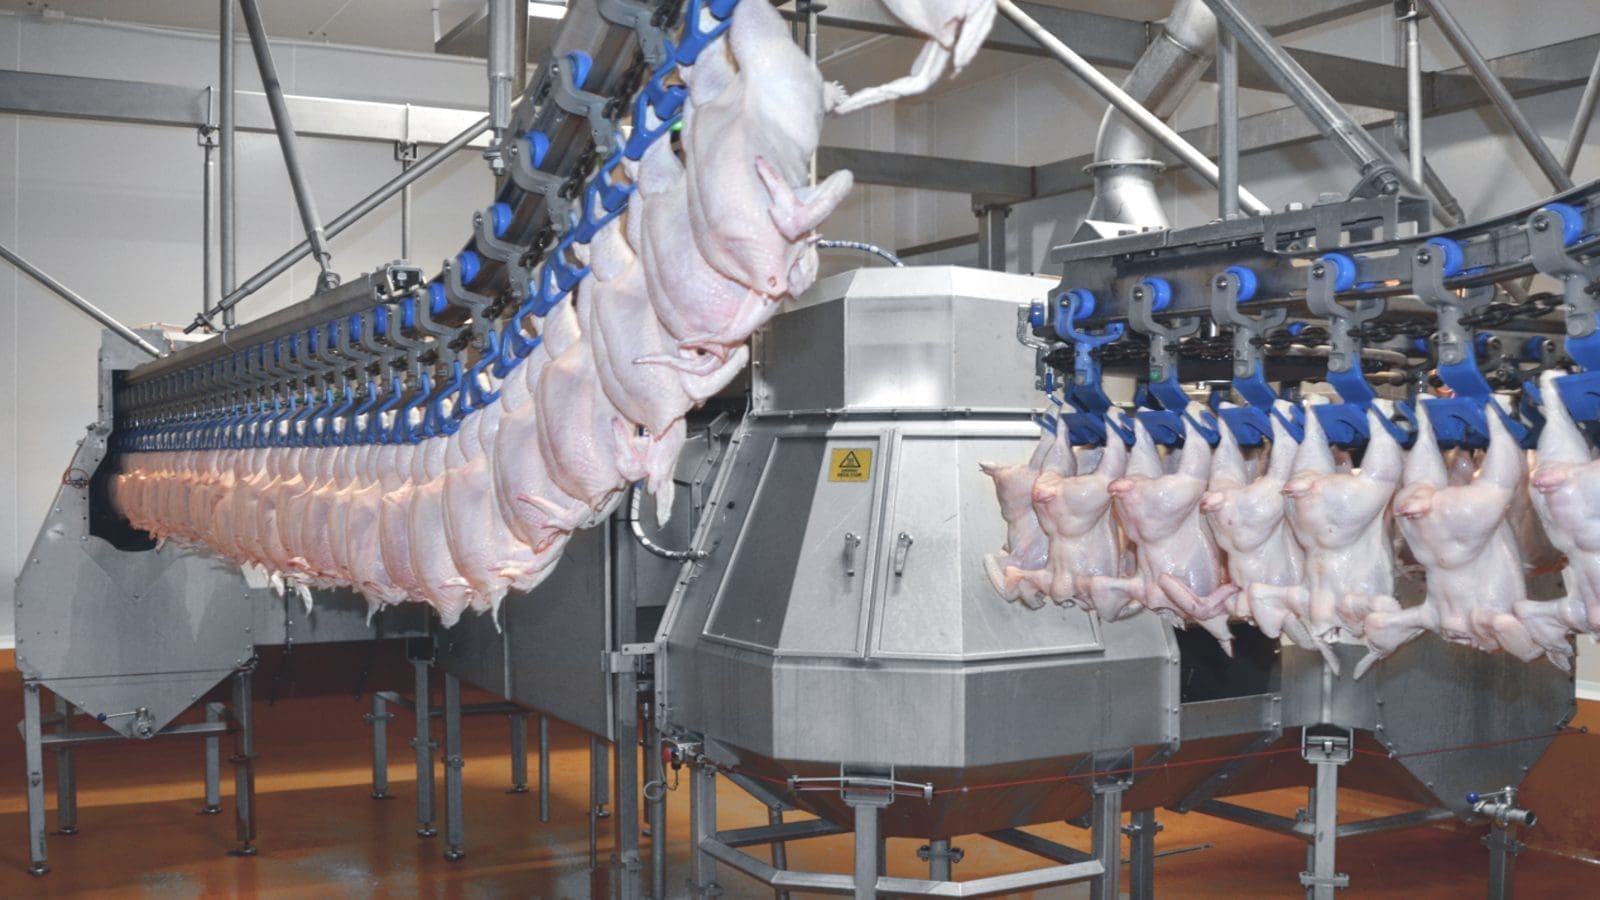 Hume International wants South Africa to adopt heat treatment protocol in poultry